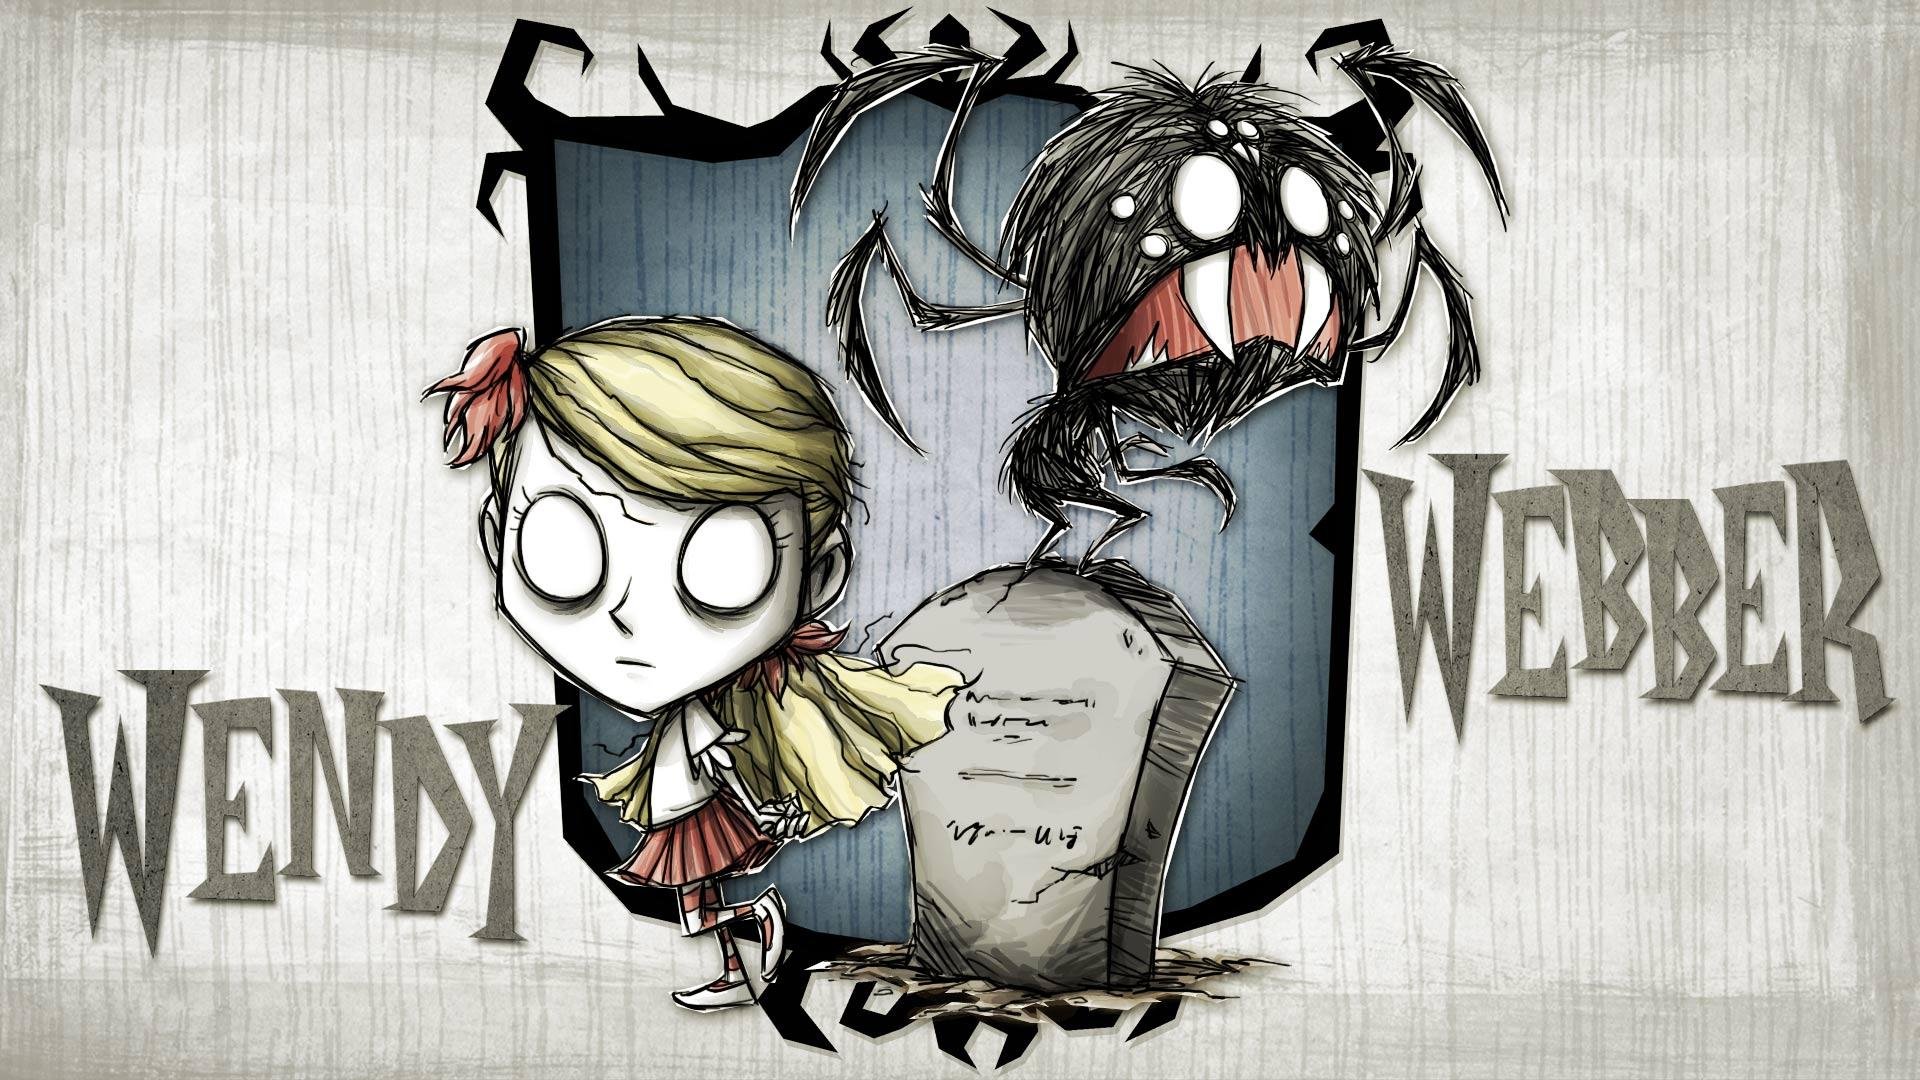 Dont le. Вебер don't Starve. Don't Starve together Веббер арт.